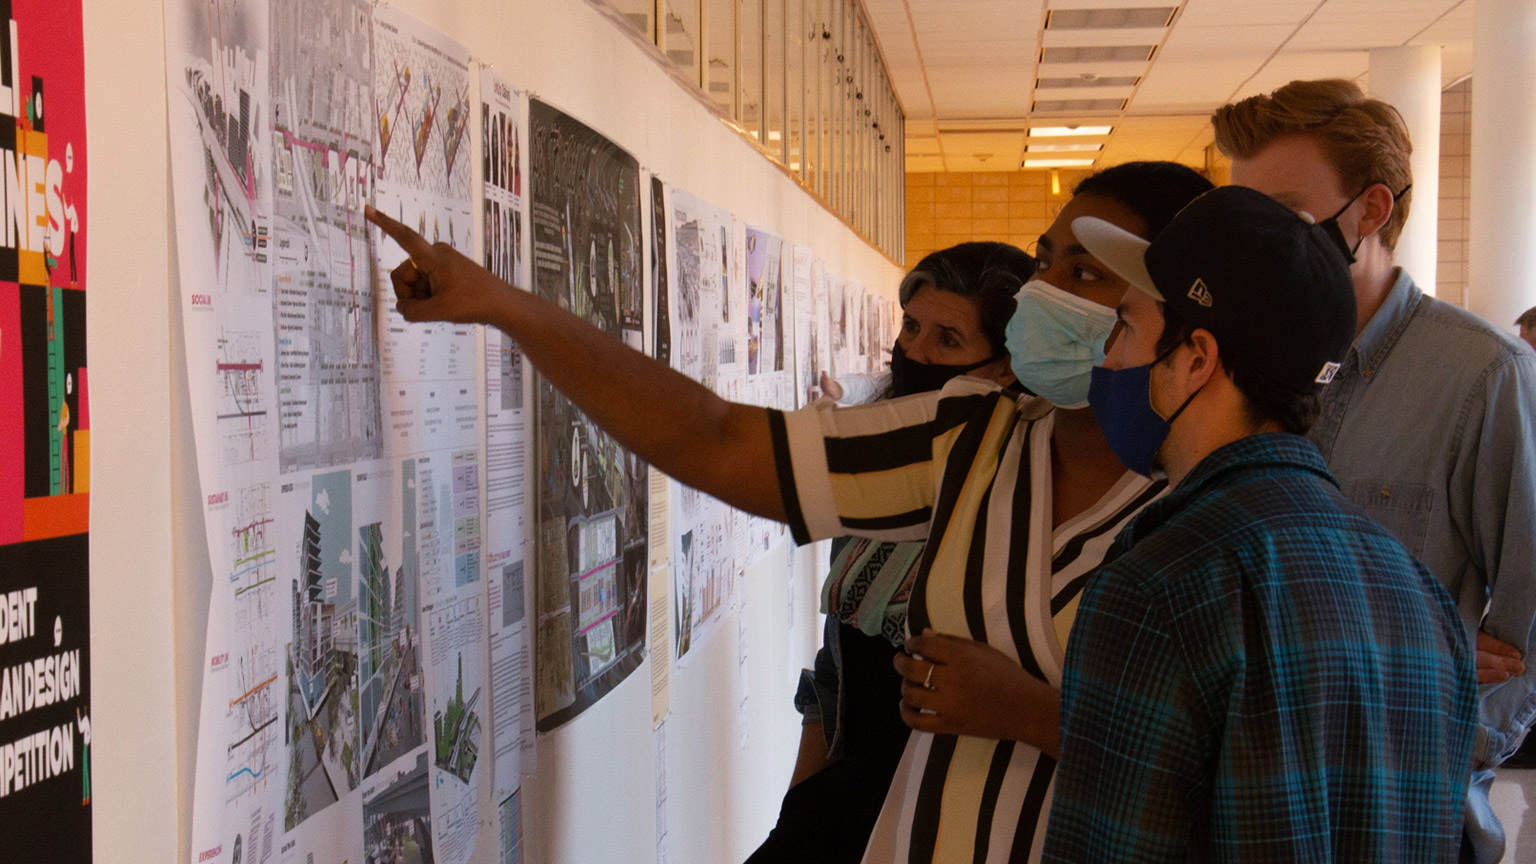 Students looking at an urban development proposal